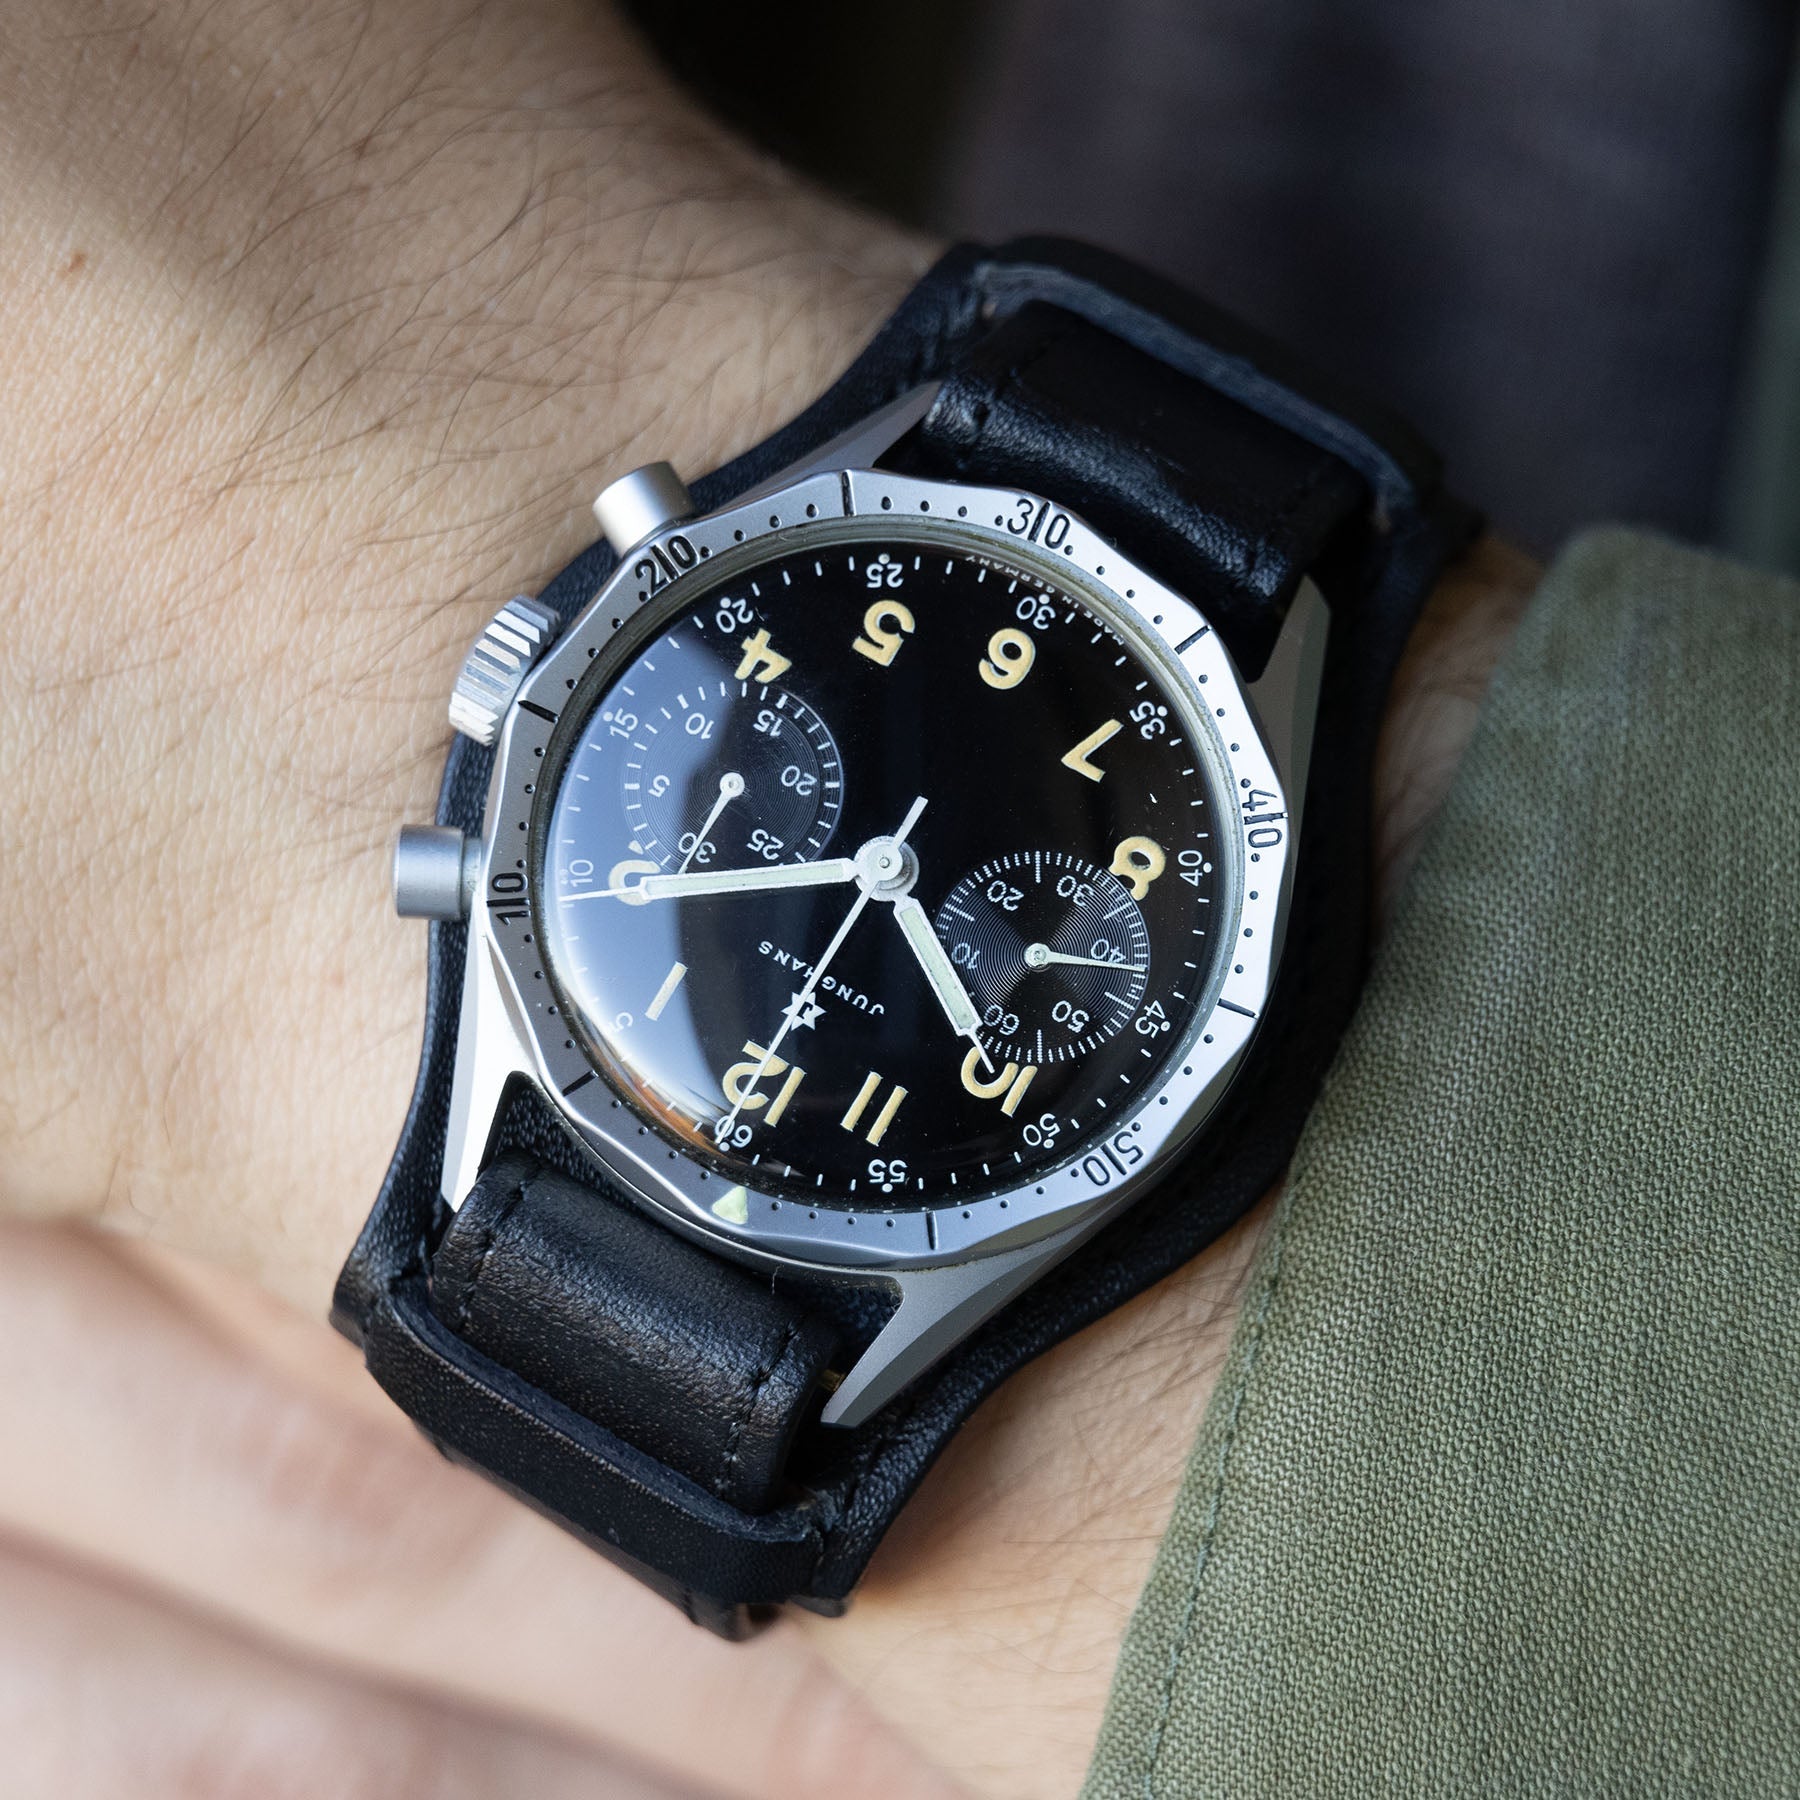 Junghans Chronograph Bundeswehr Issued Type 111